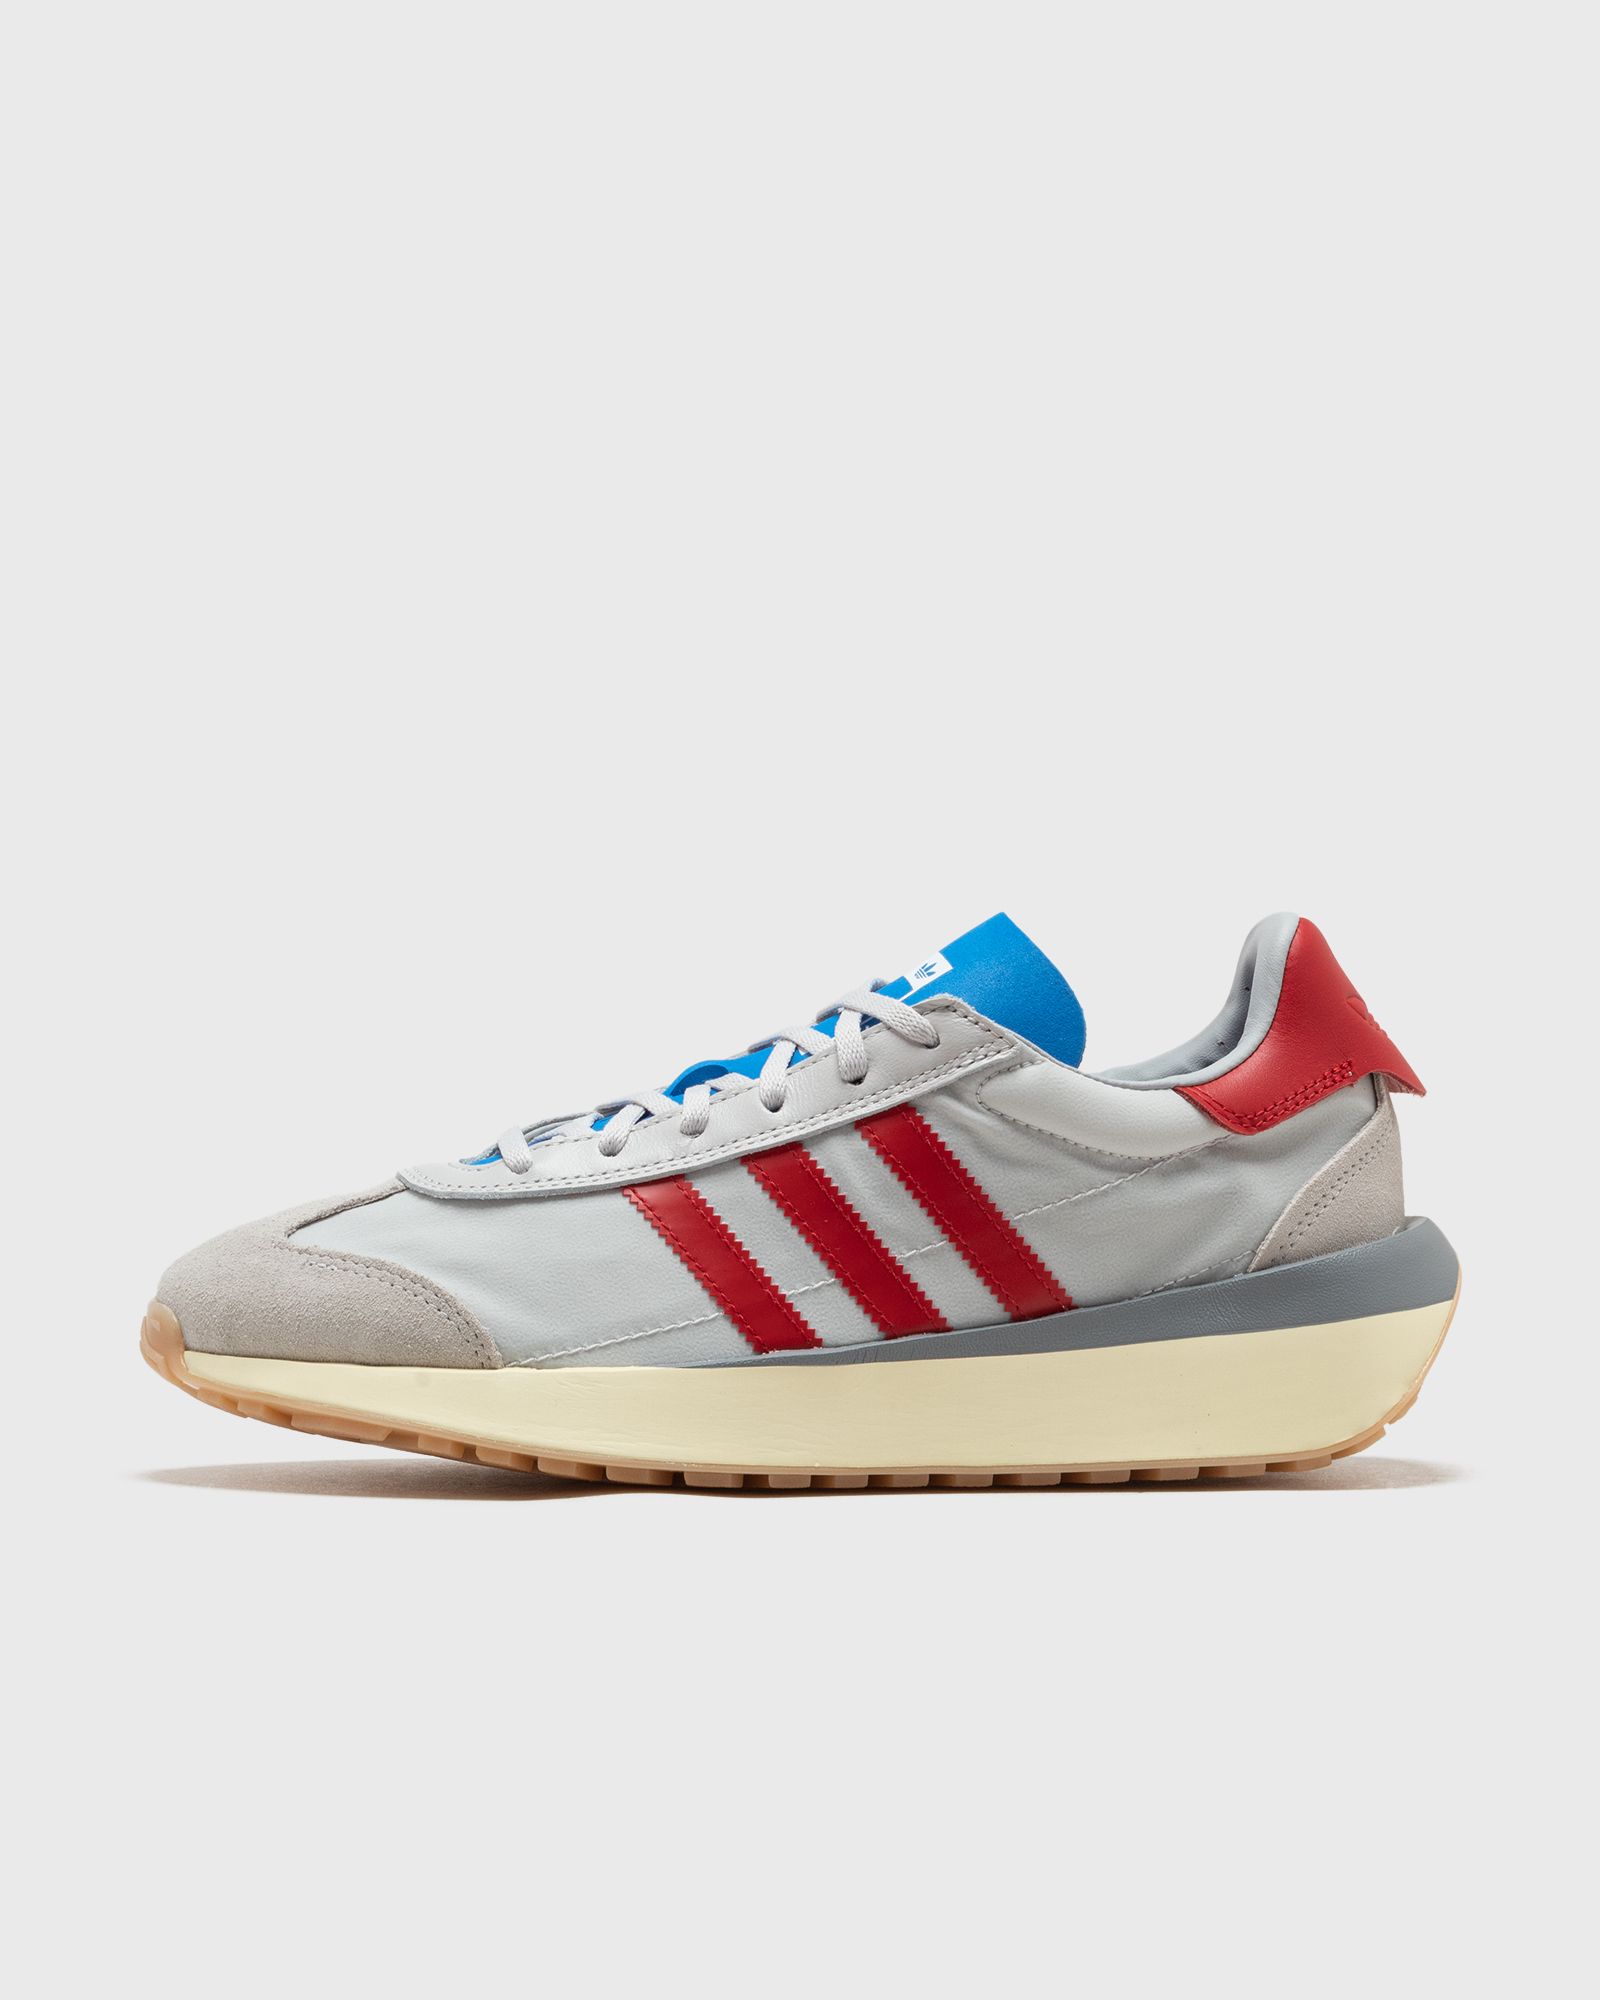 Adidas COUNTRY XLG men Lowtop grey|red in Größe:42